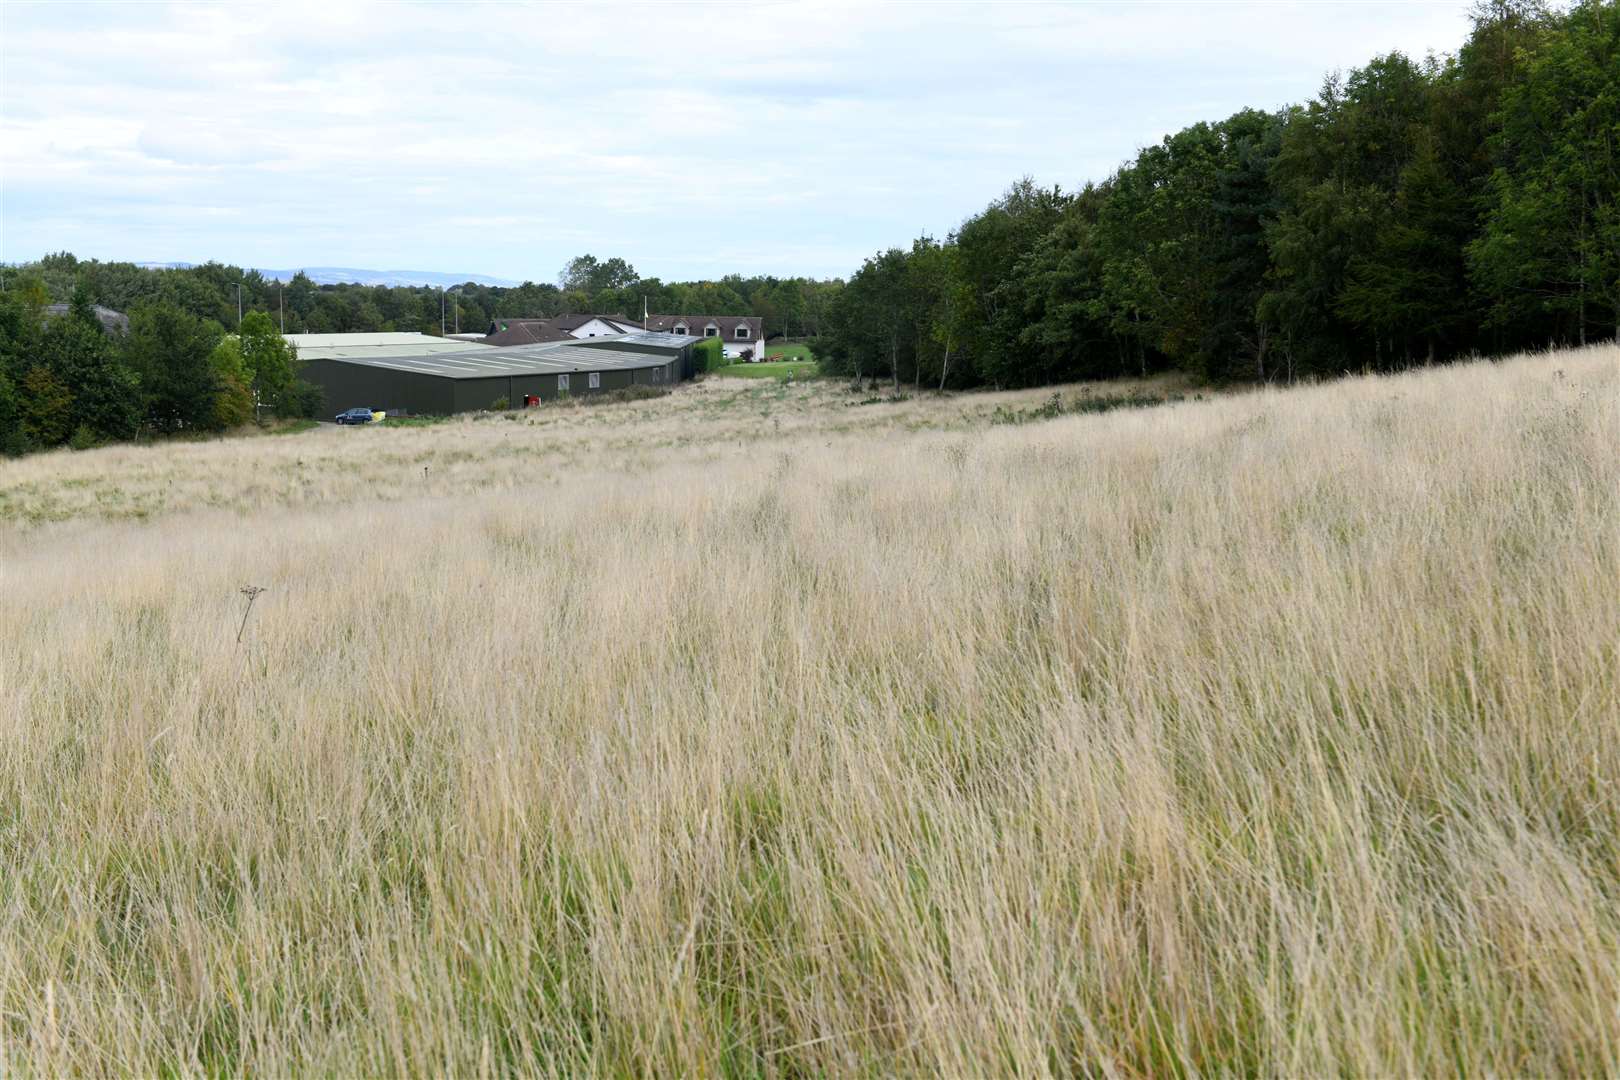 The scheme if approved would be located to the left of the picture behind the go-karting track seen at the right of the picture.